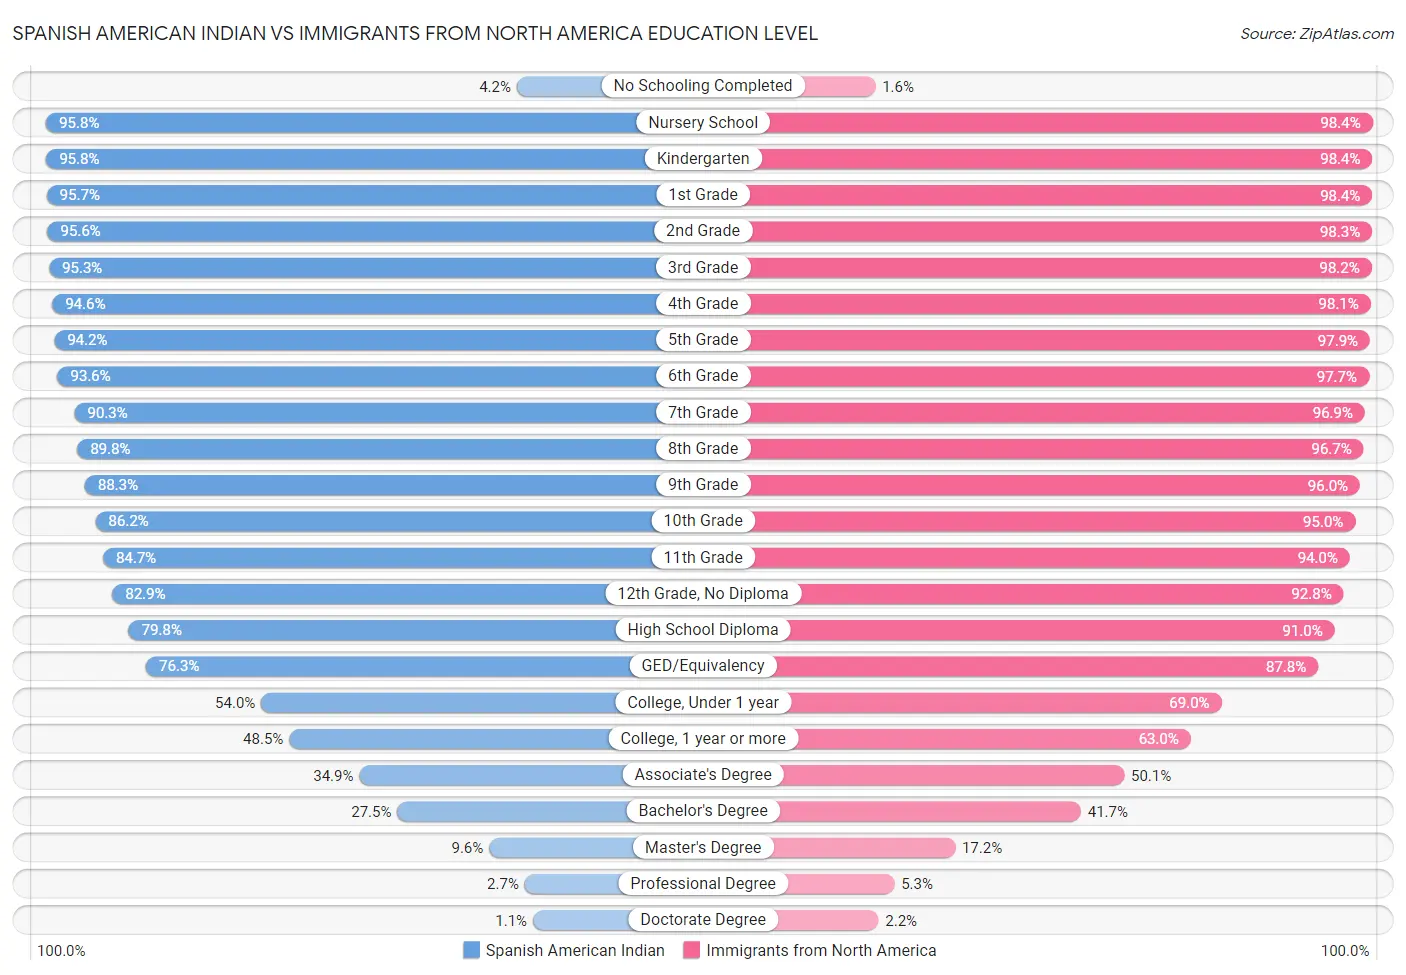 Spanish American Indian vs Immigrants from North America Education Level